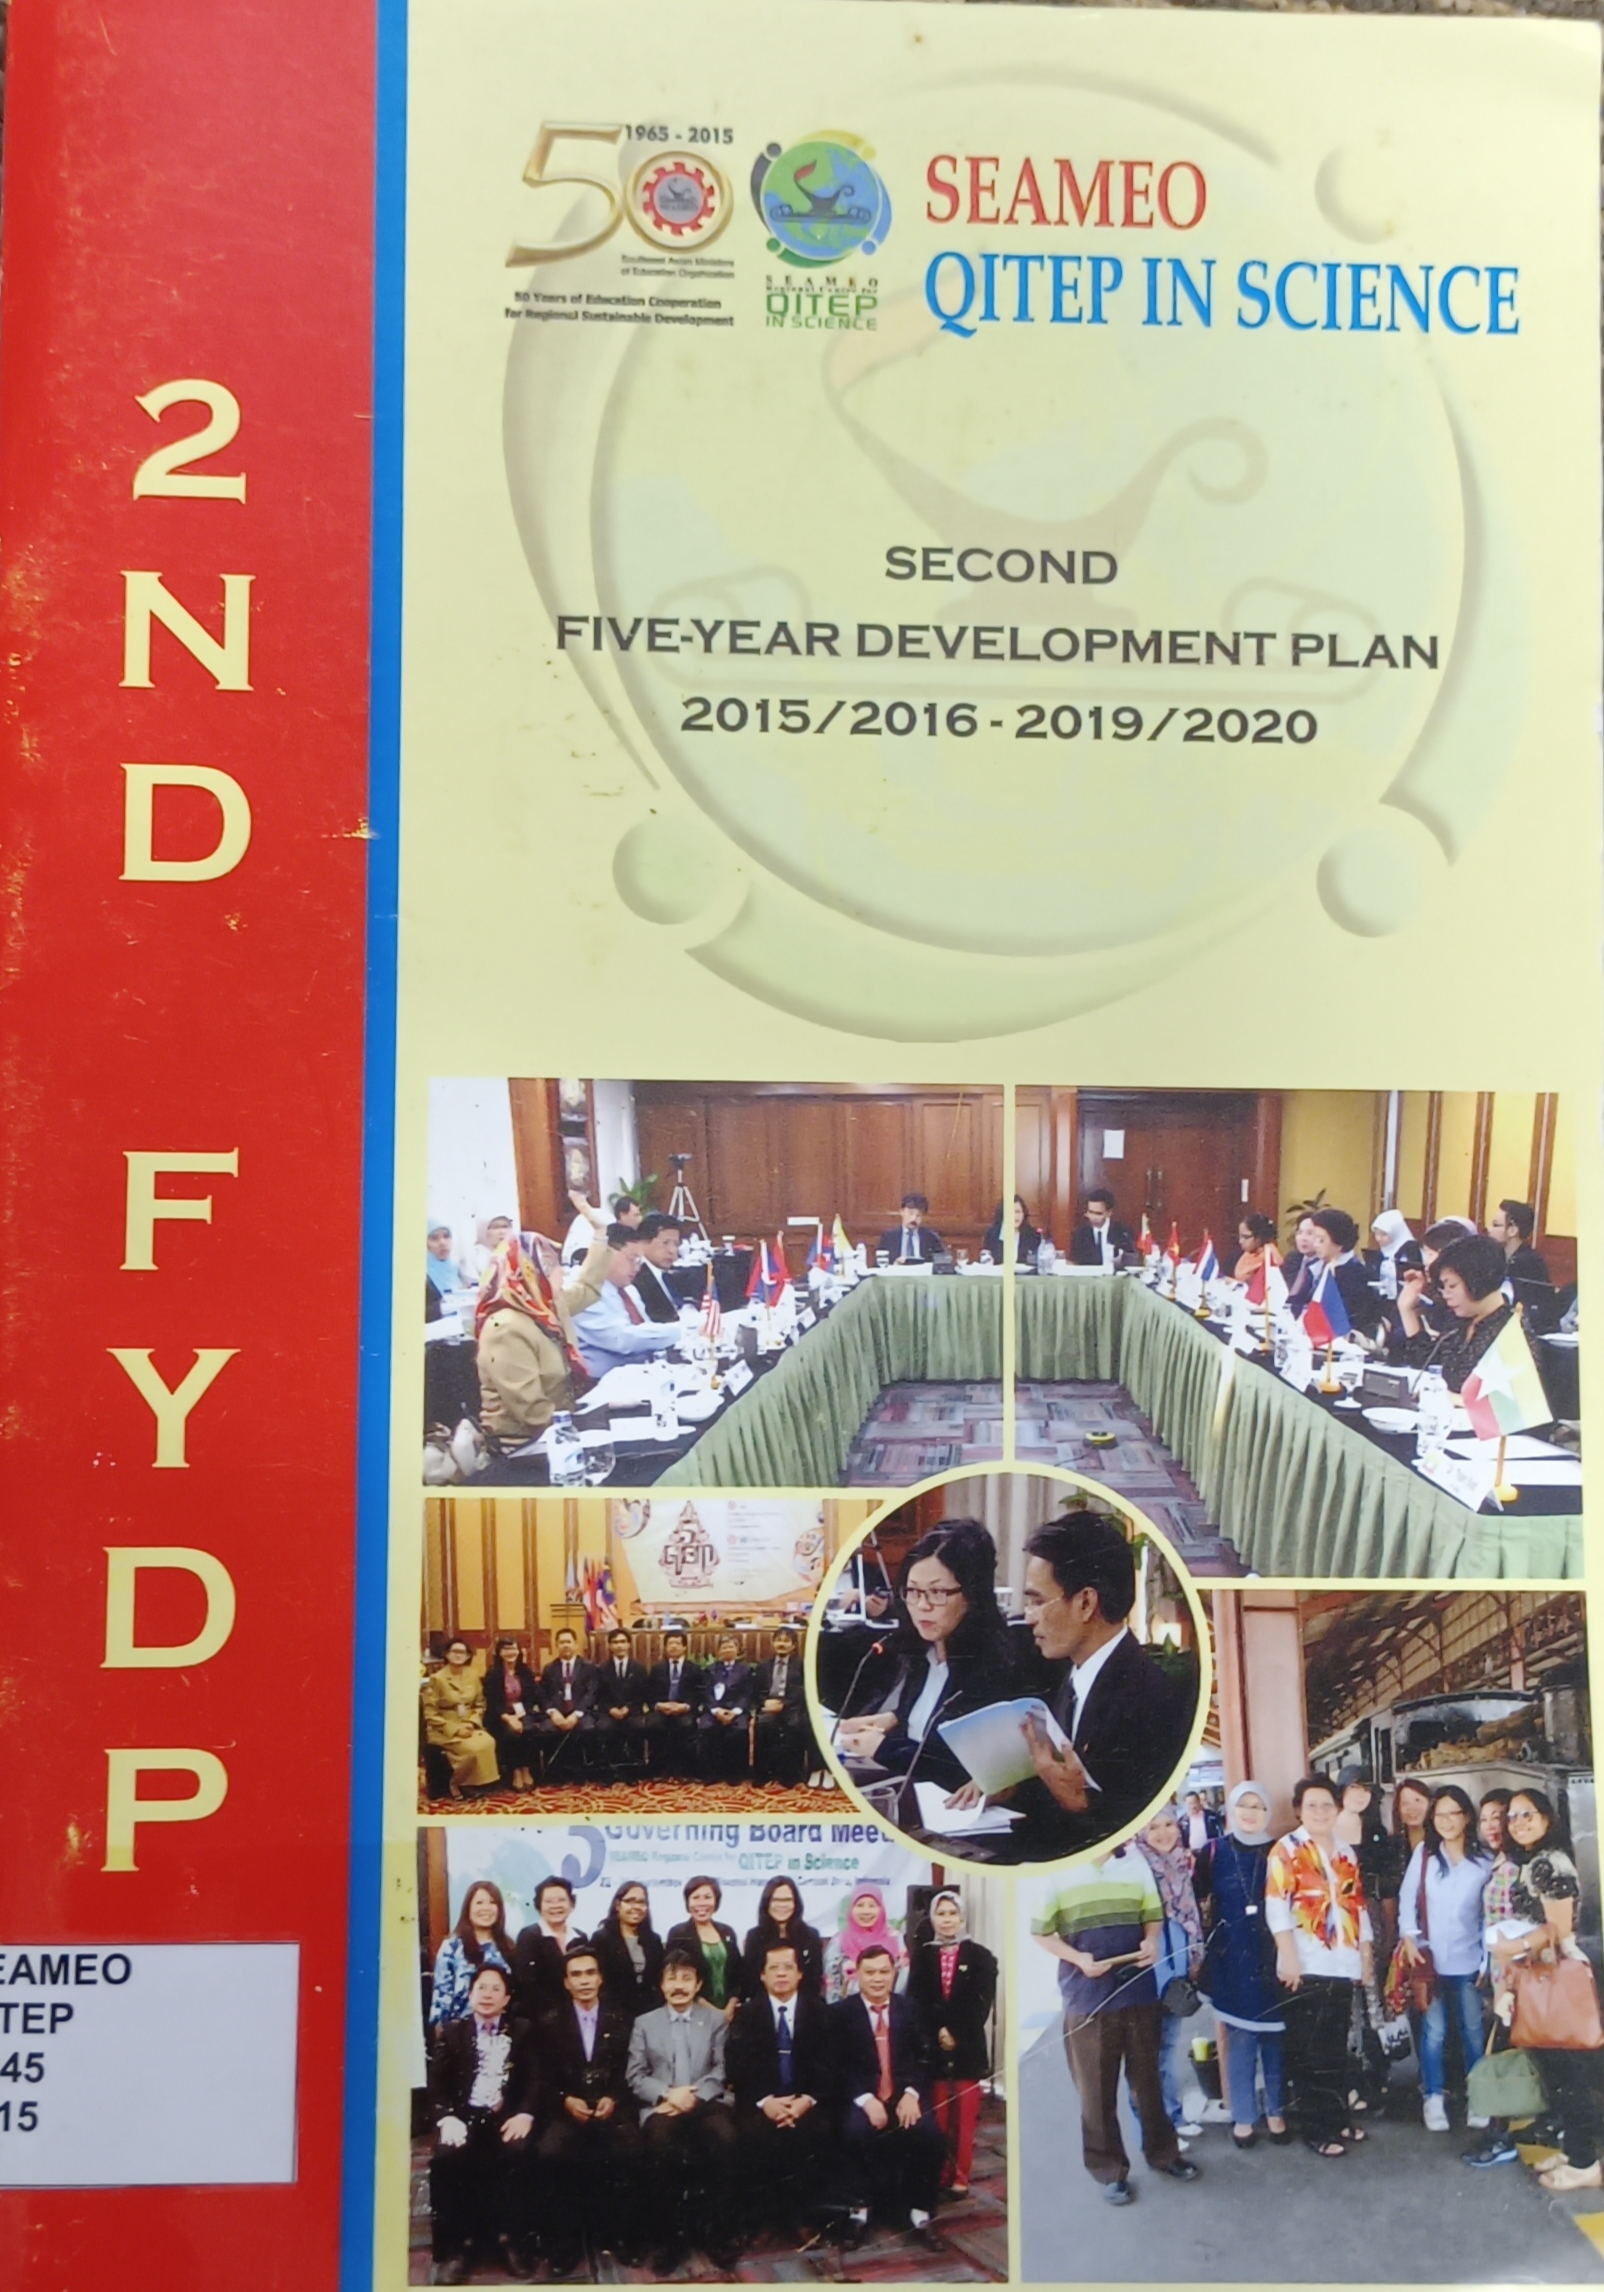 Cover image for Second five-year development plan 2015/2016 - 2019/2020 bibliographic